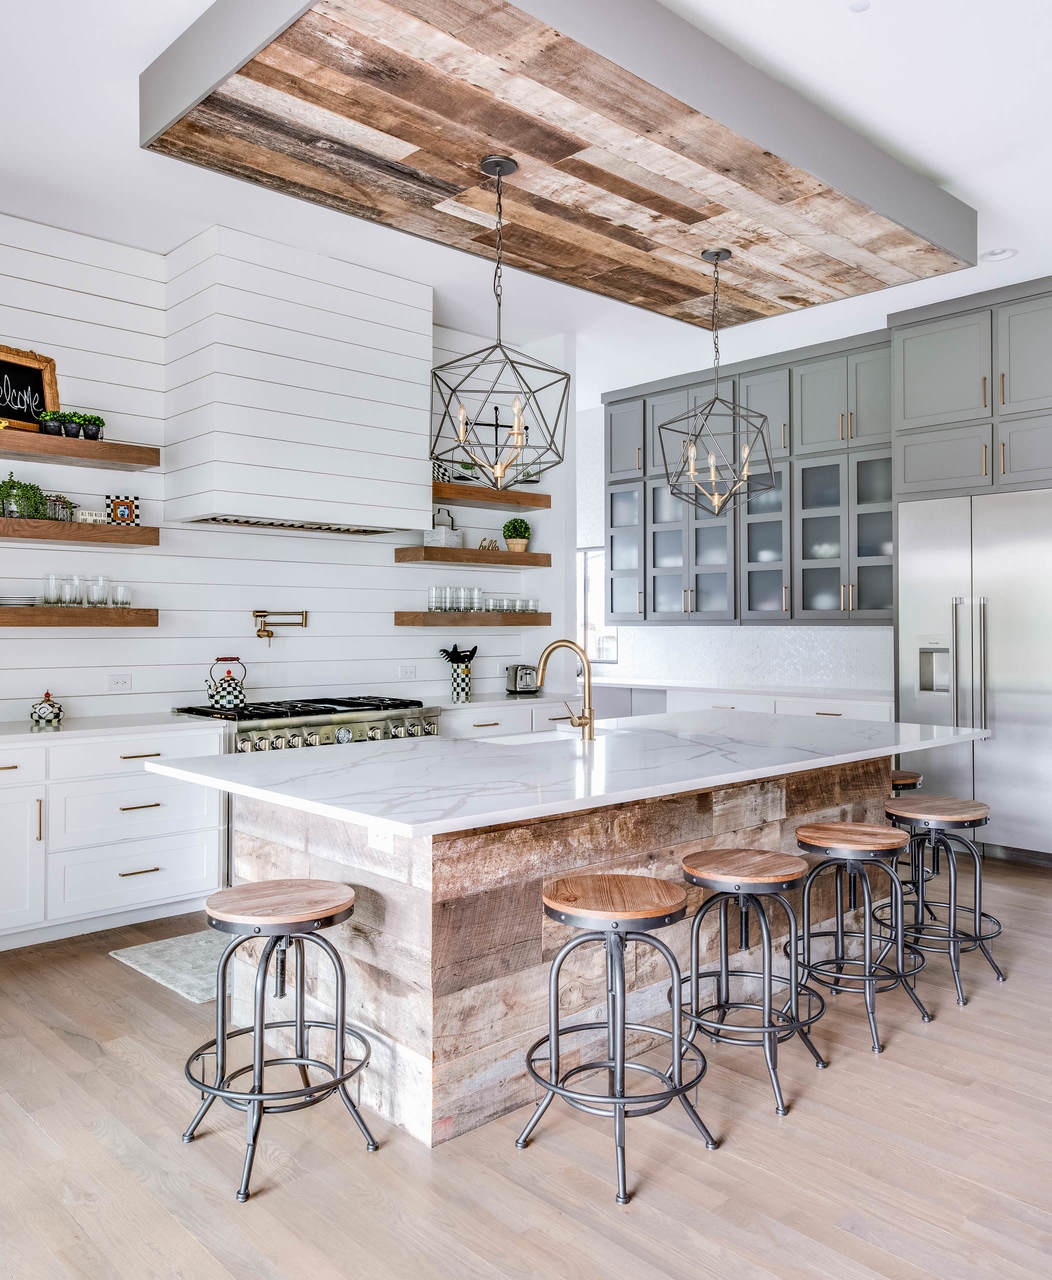 Industrial-Farmhouse-Style Kitchen lights are very appealing and they come in various styles such as pendants like in this kitchen.